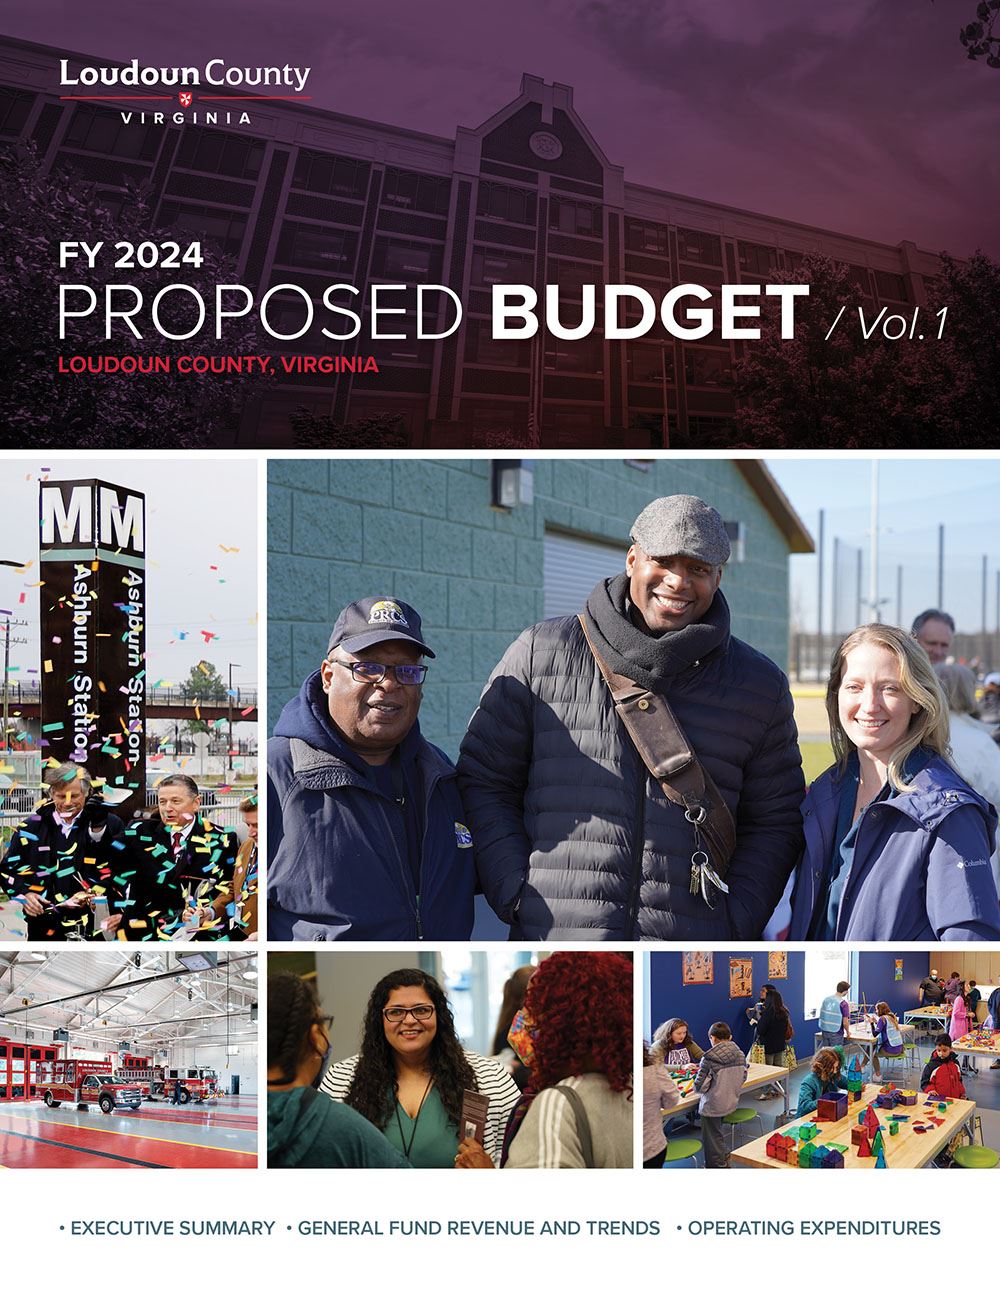 Link to proposed Loudoun County budget for Fiscal Year 2024